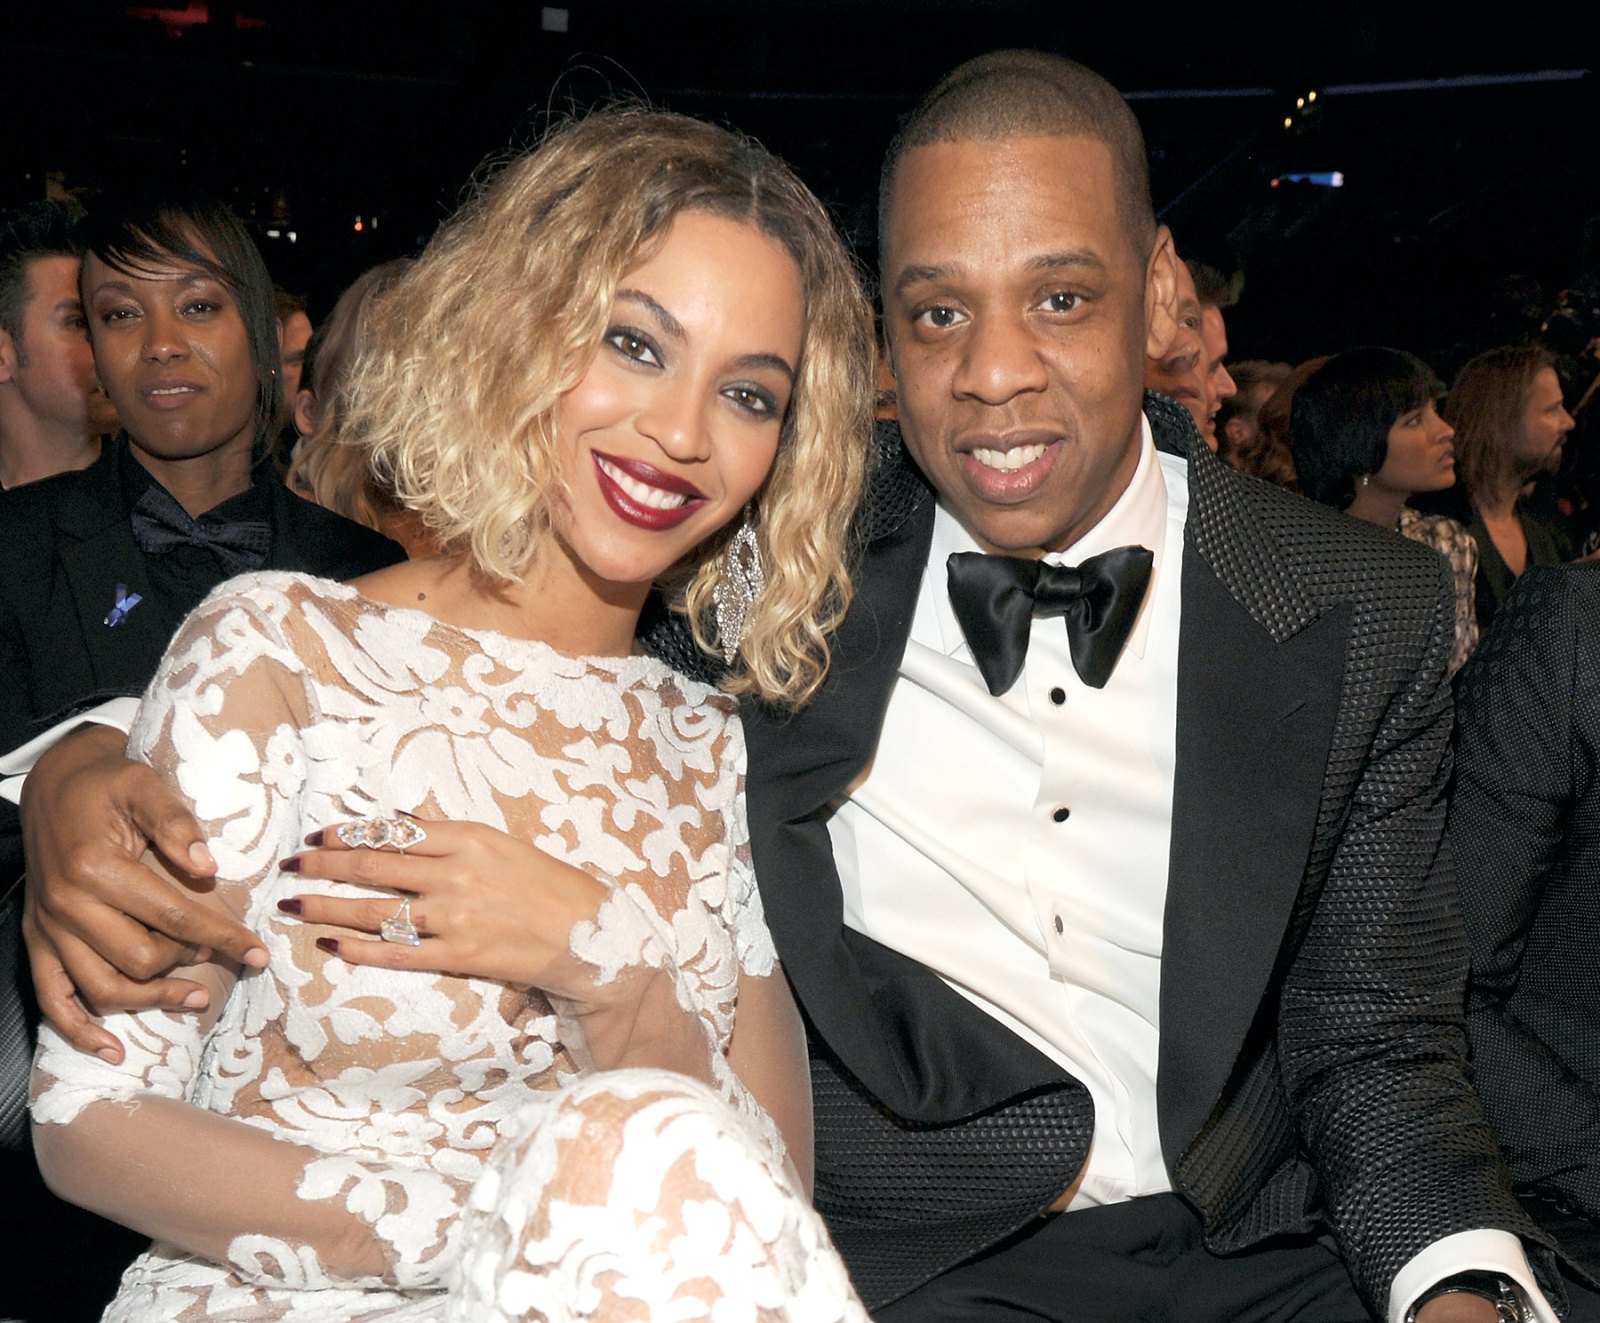 Beyonce and Jay-Z at the 56th GRAMMY Awards on Jan. 26, 2014